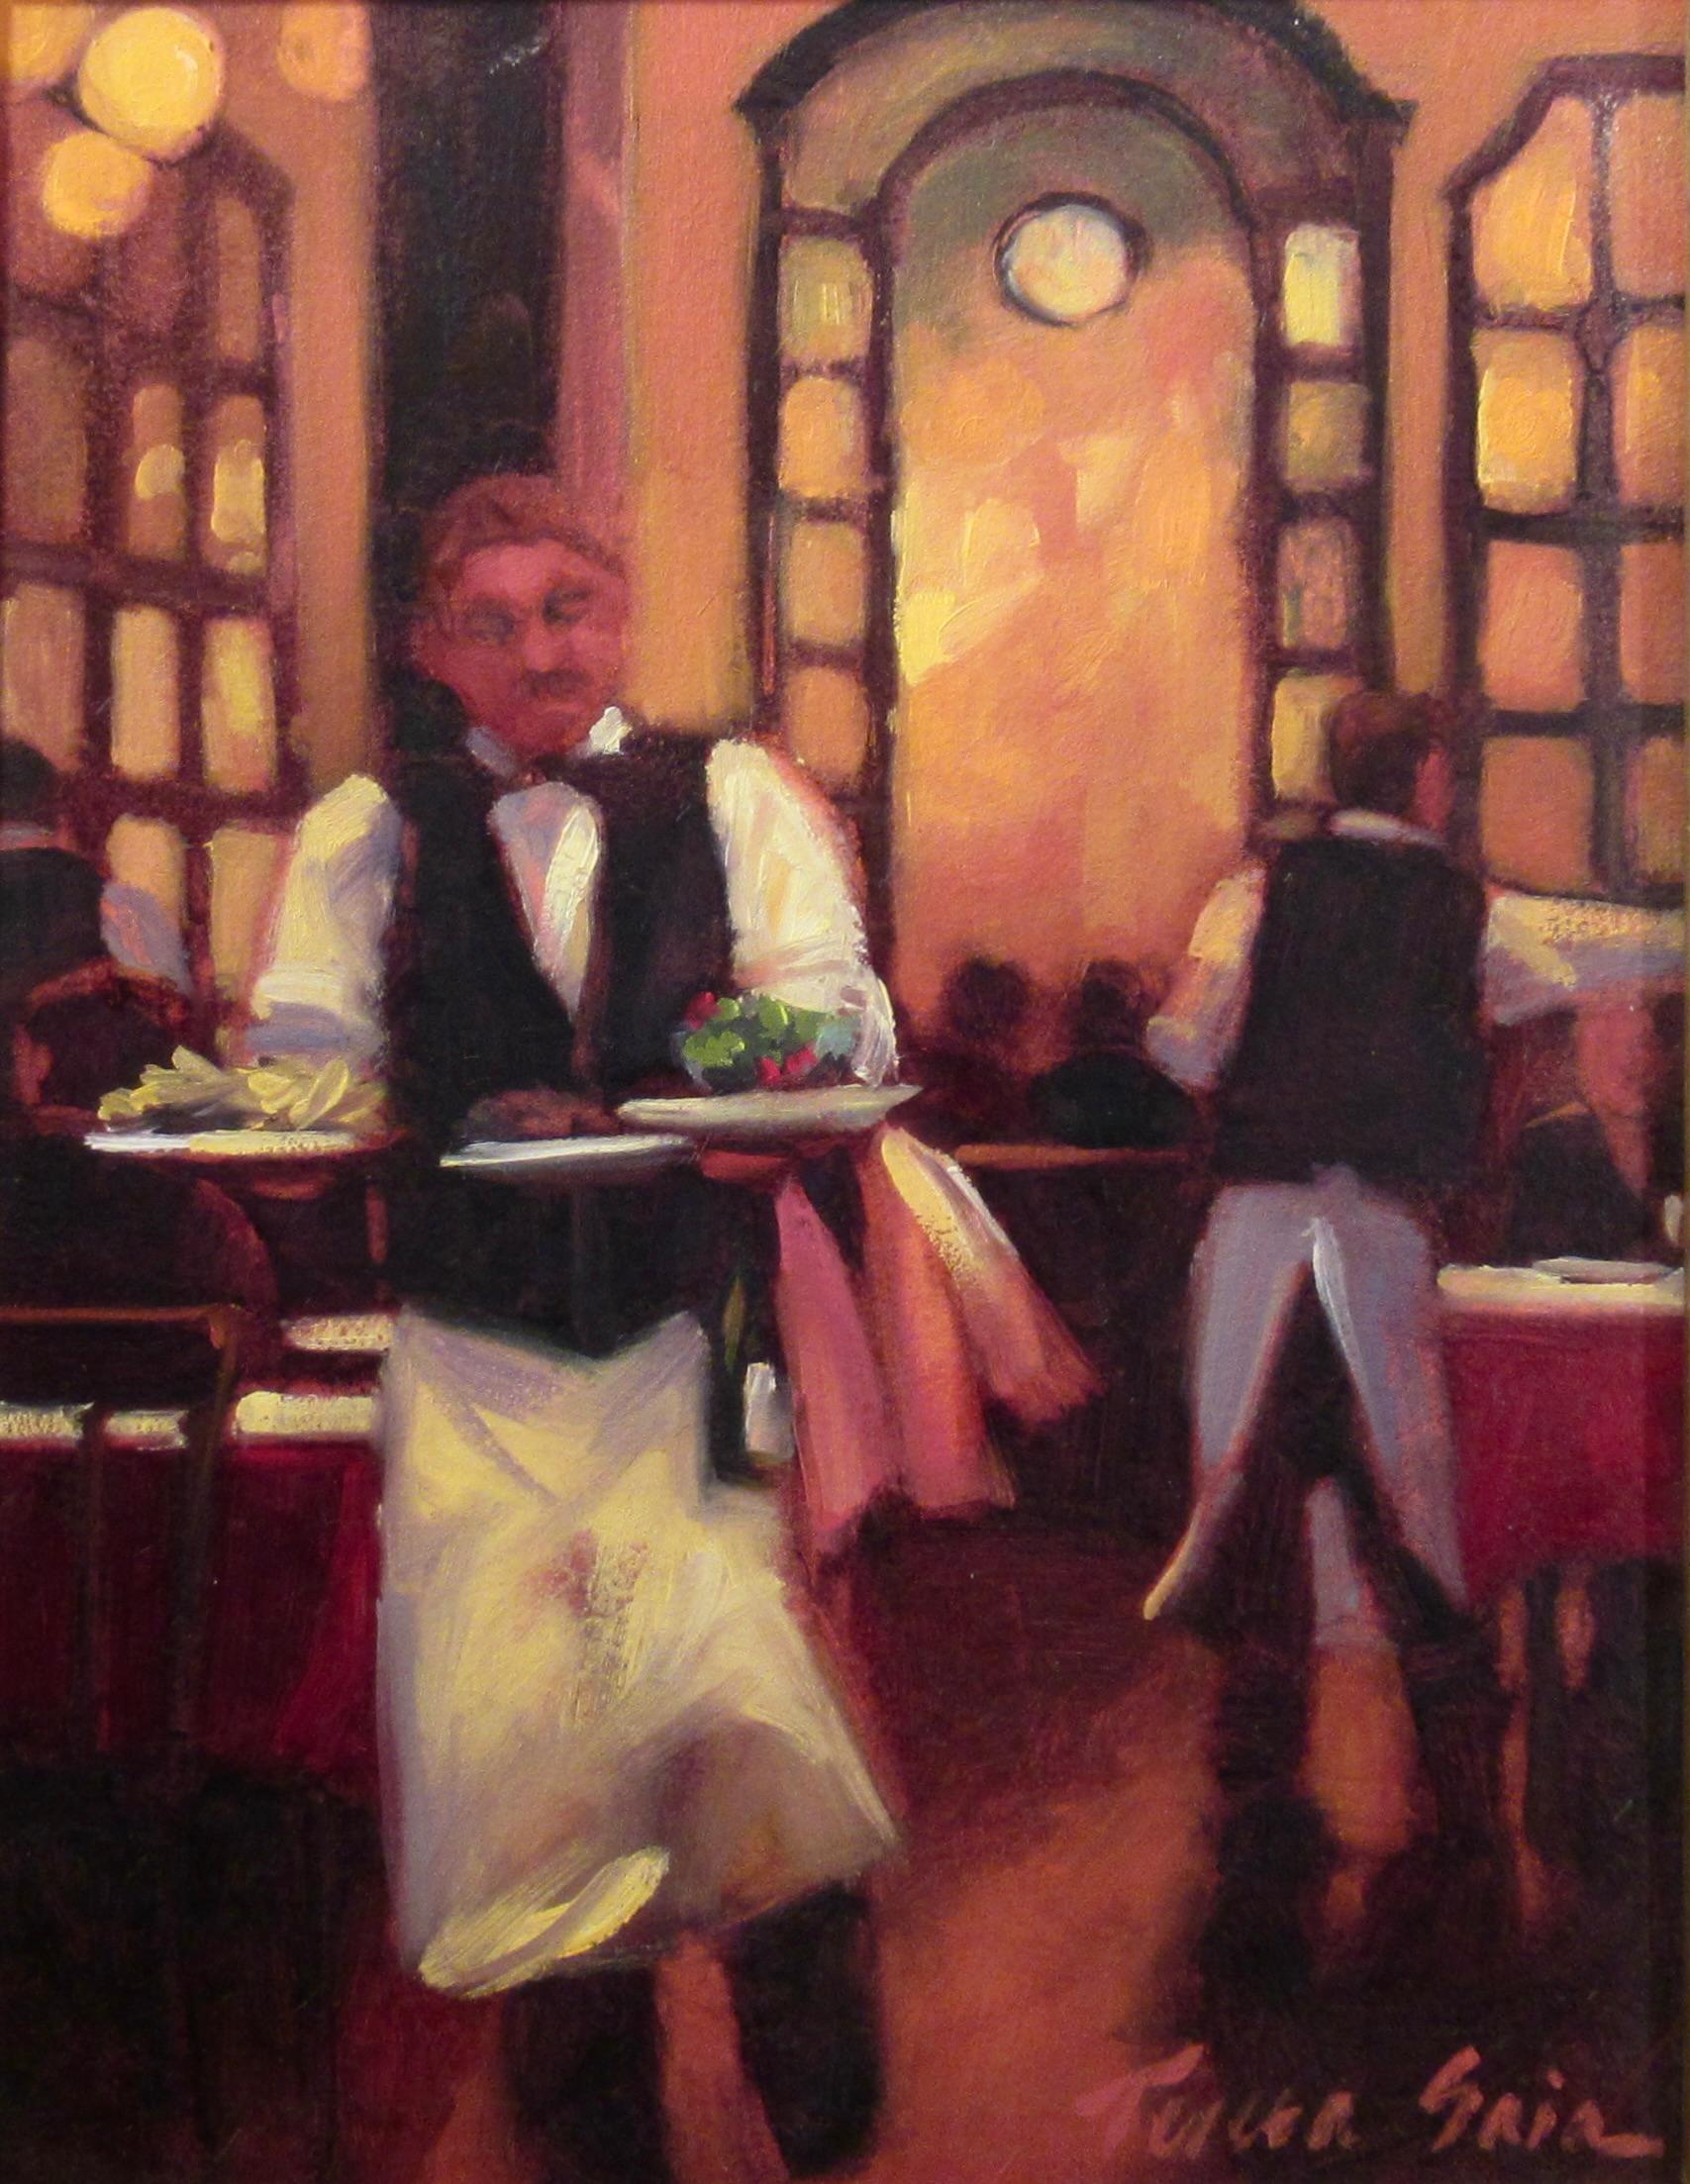 Untitled (The Waiter) - Painting by Teresa Saia